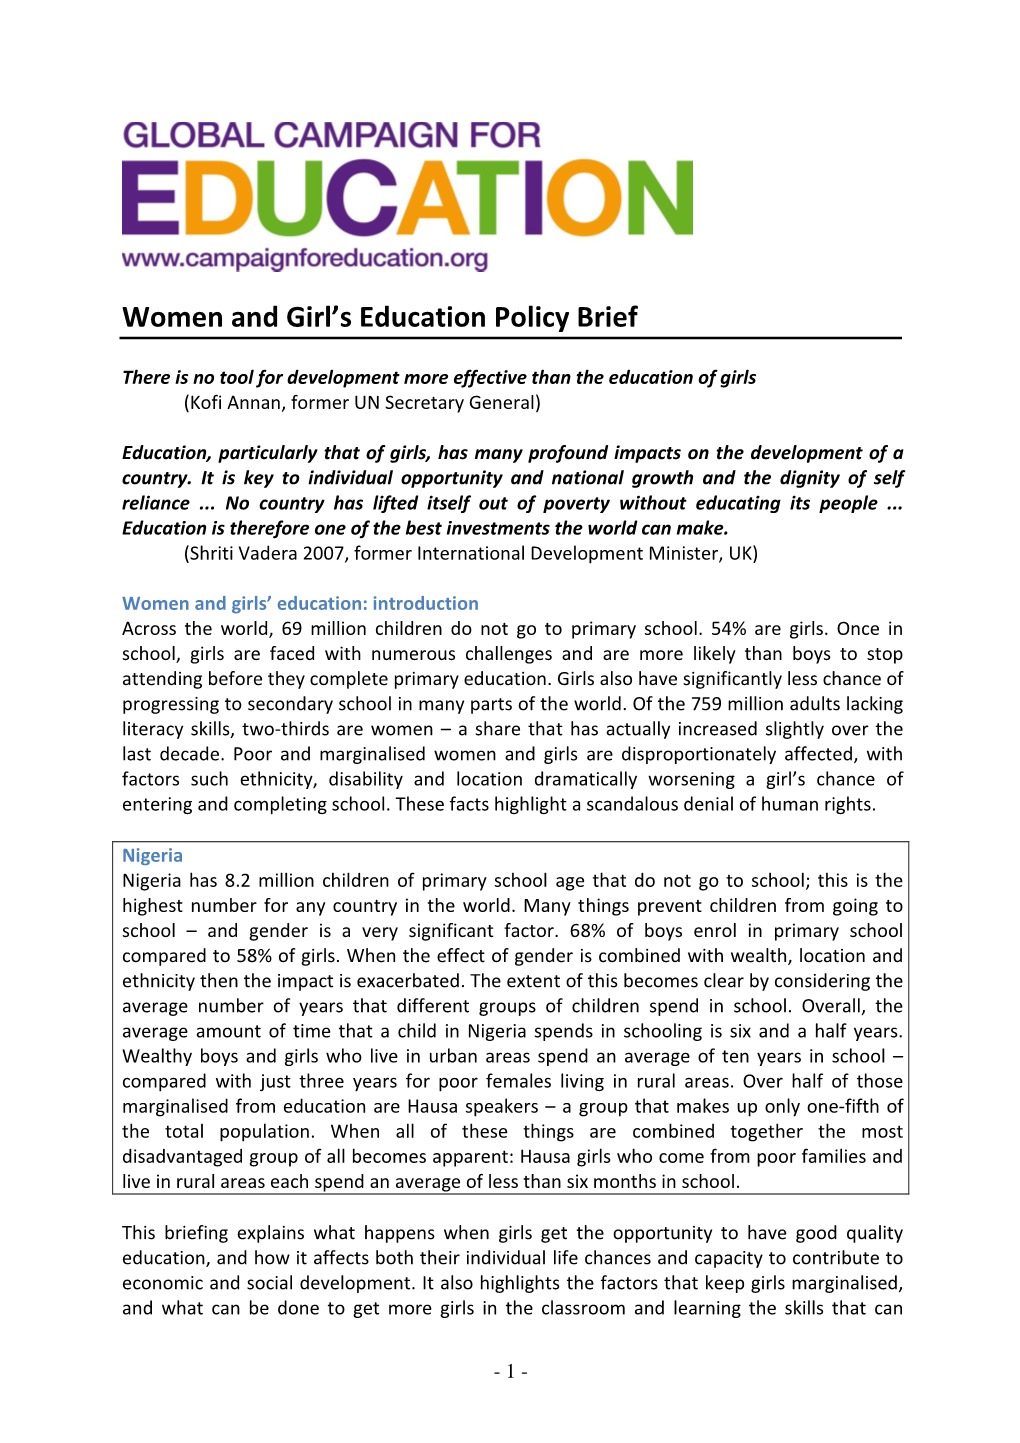 Women and Girl's Education Policy Brief